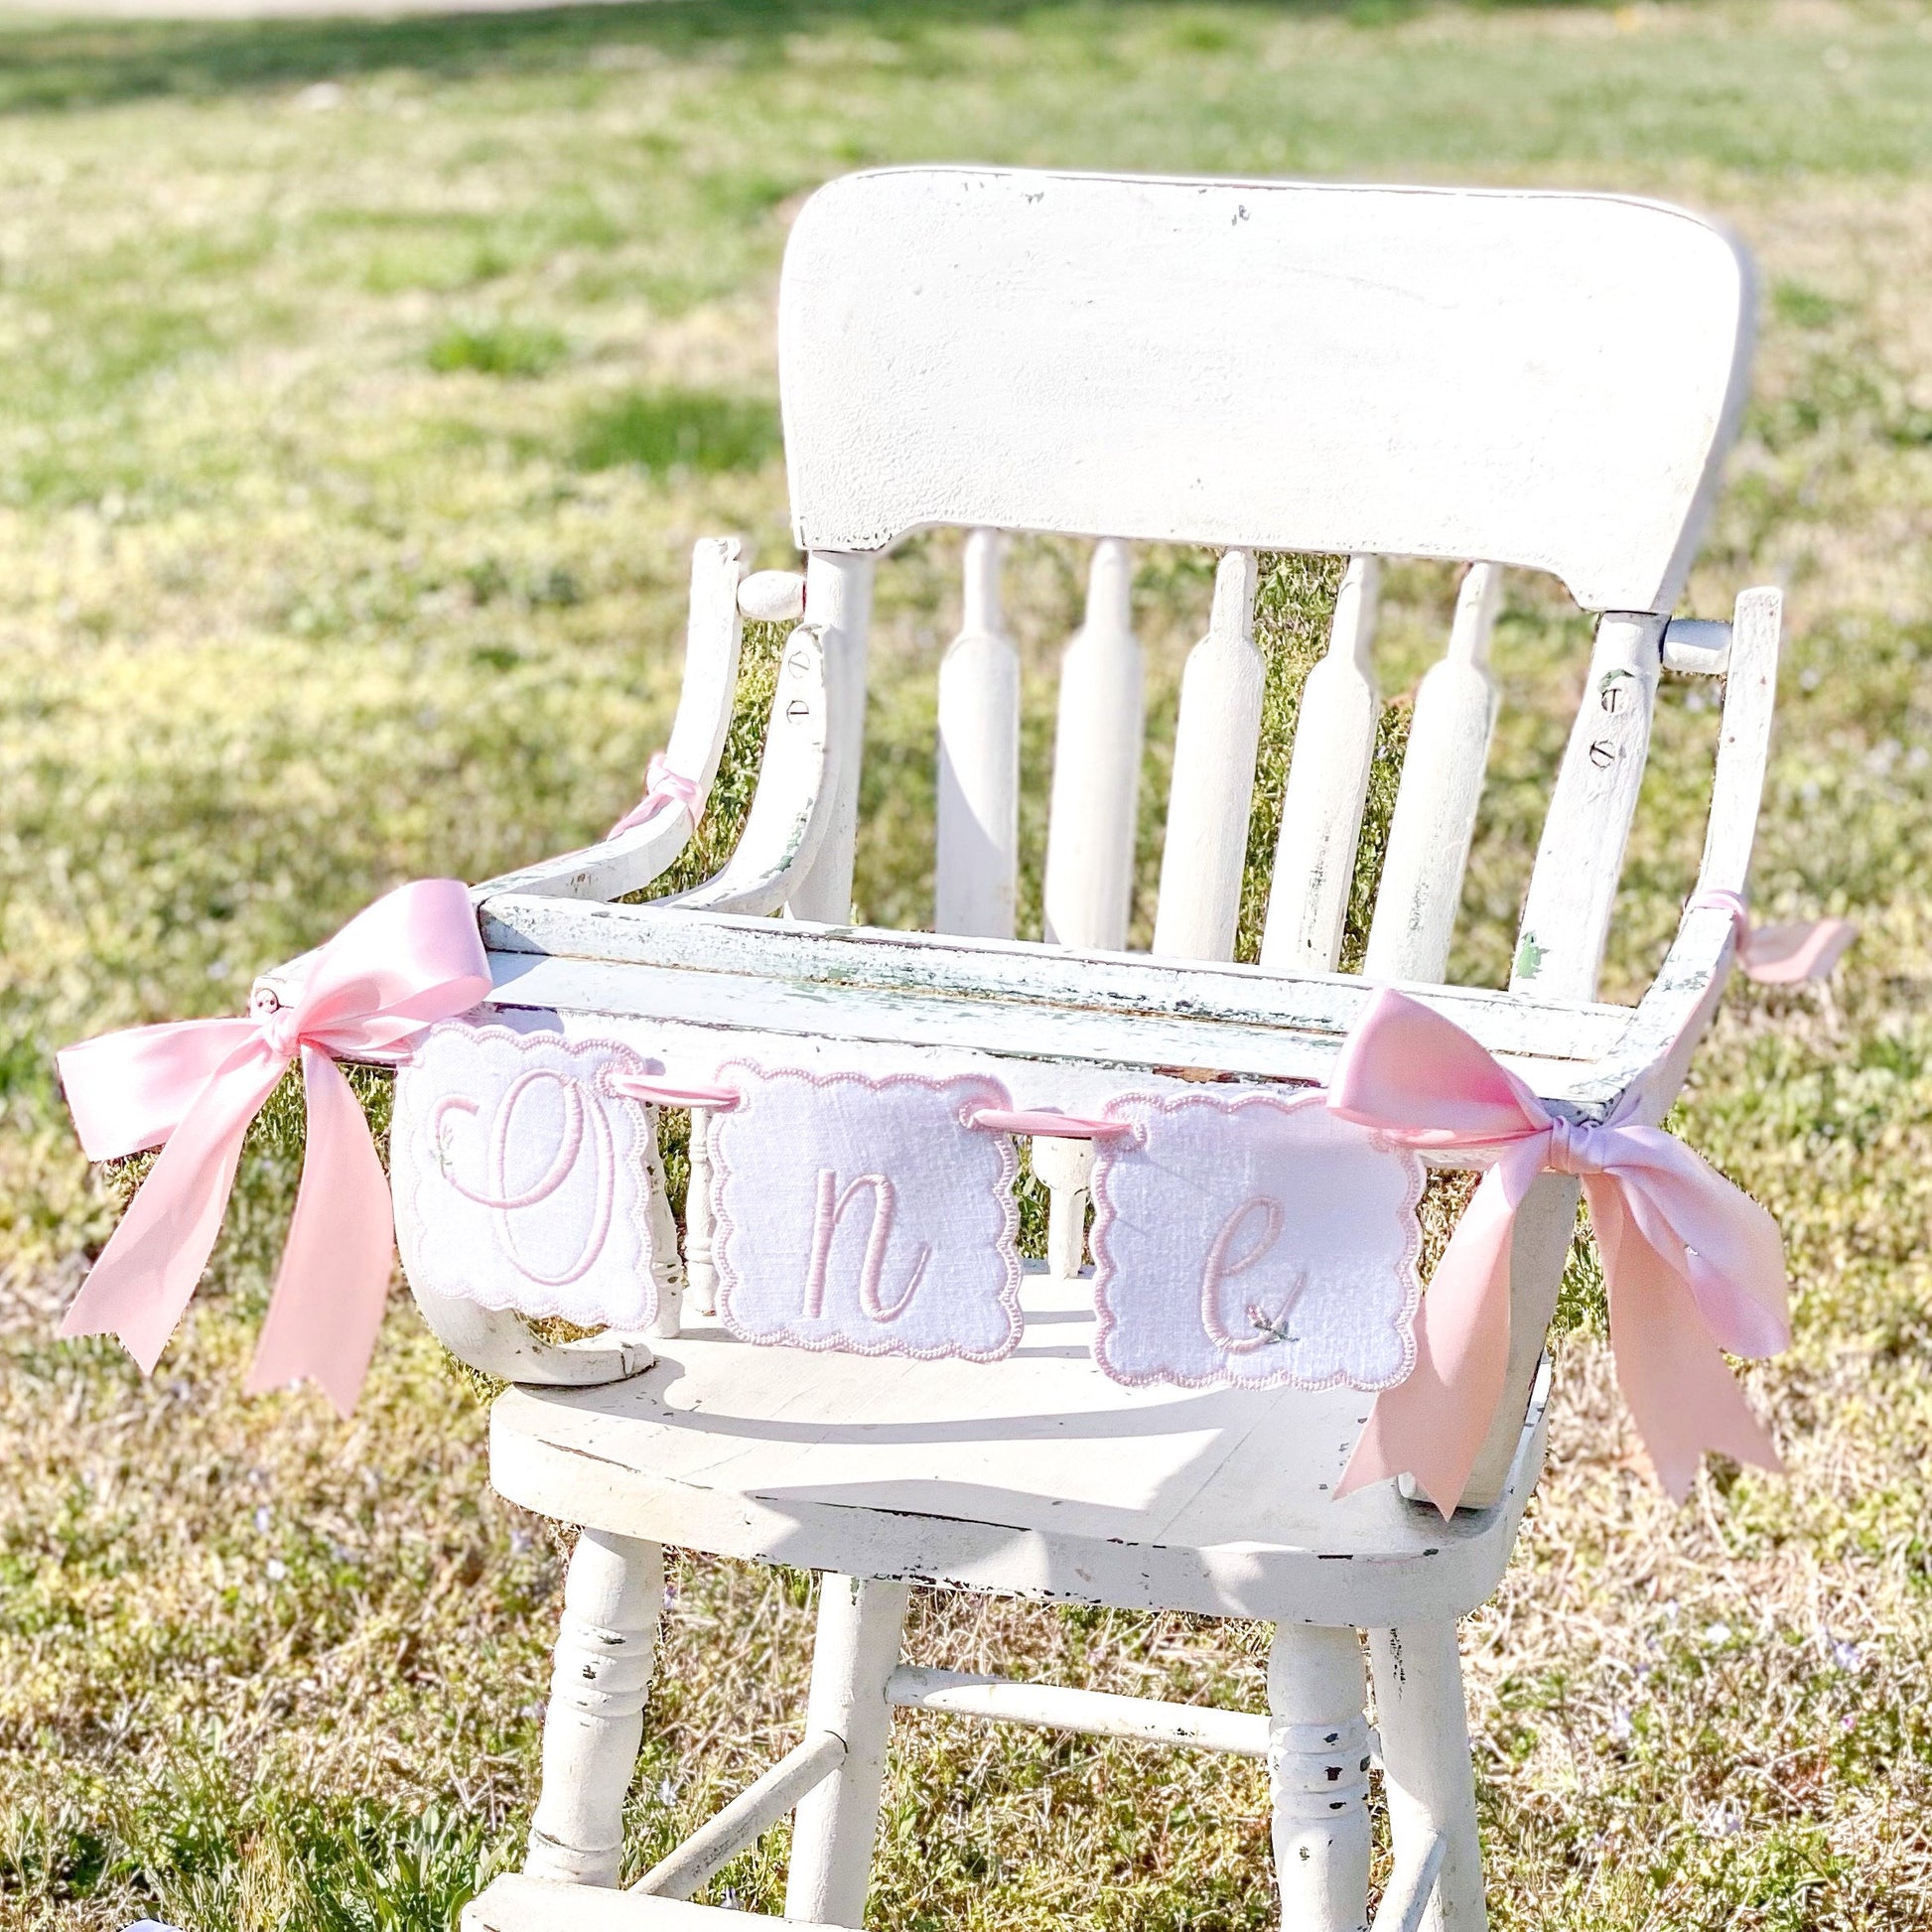 Heirloom Bows and Blooms High Chair Banner